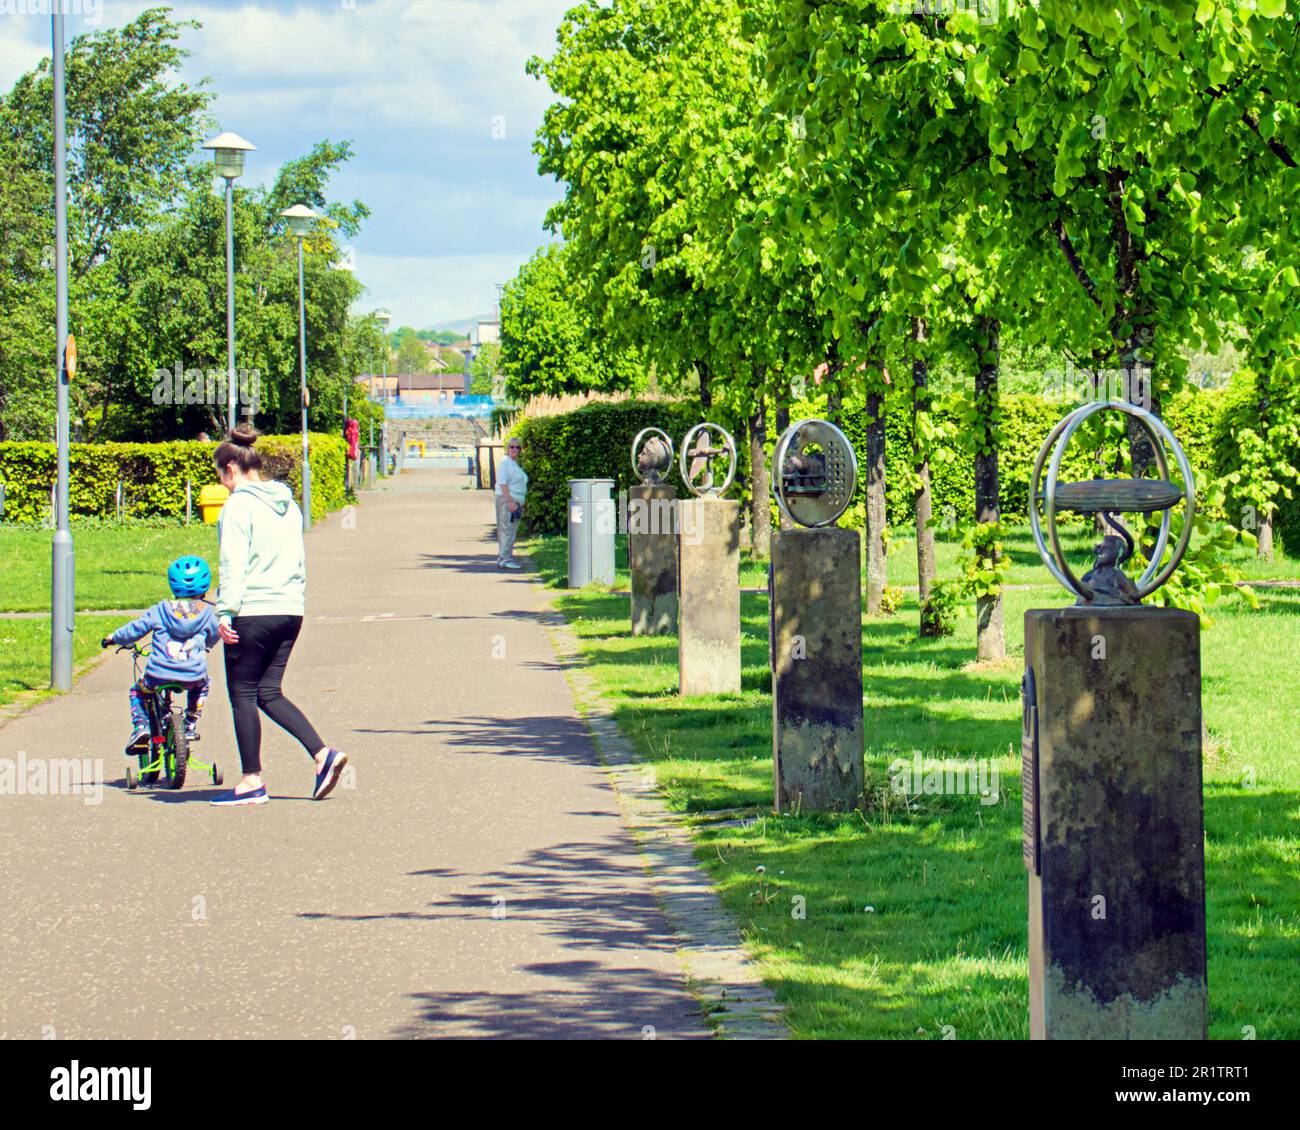 The Pillars clyde view park mother child bike Stock Photo